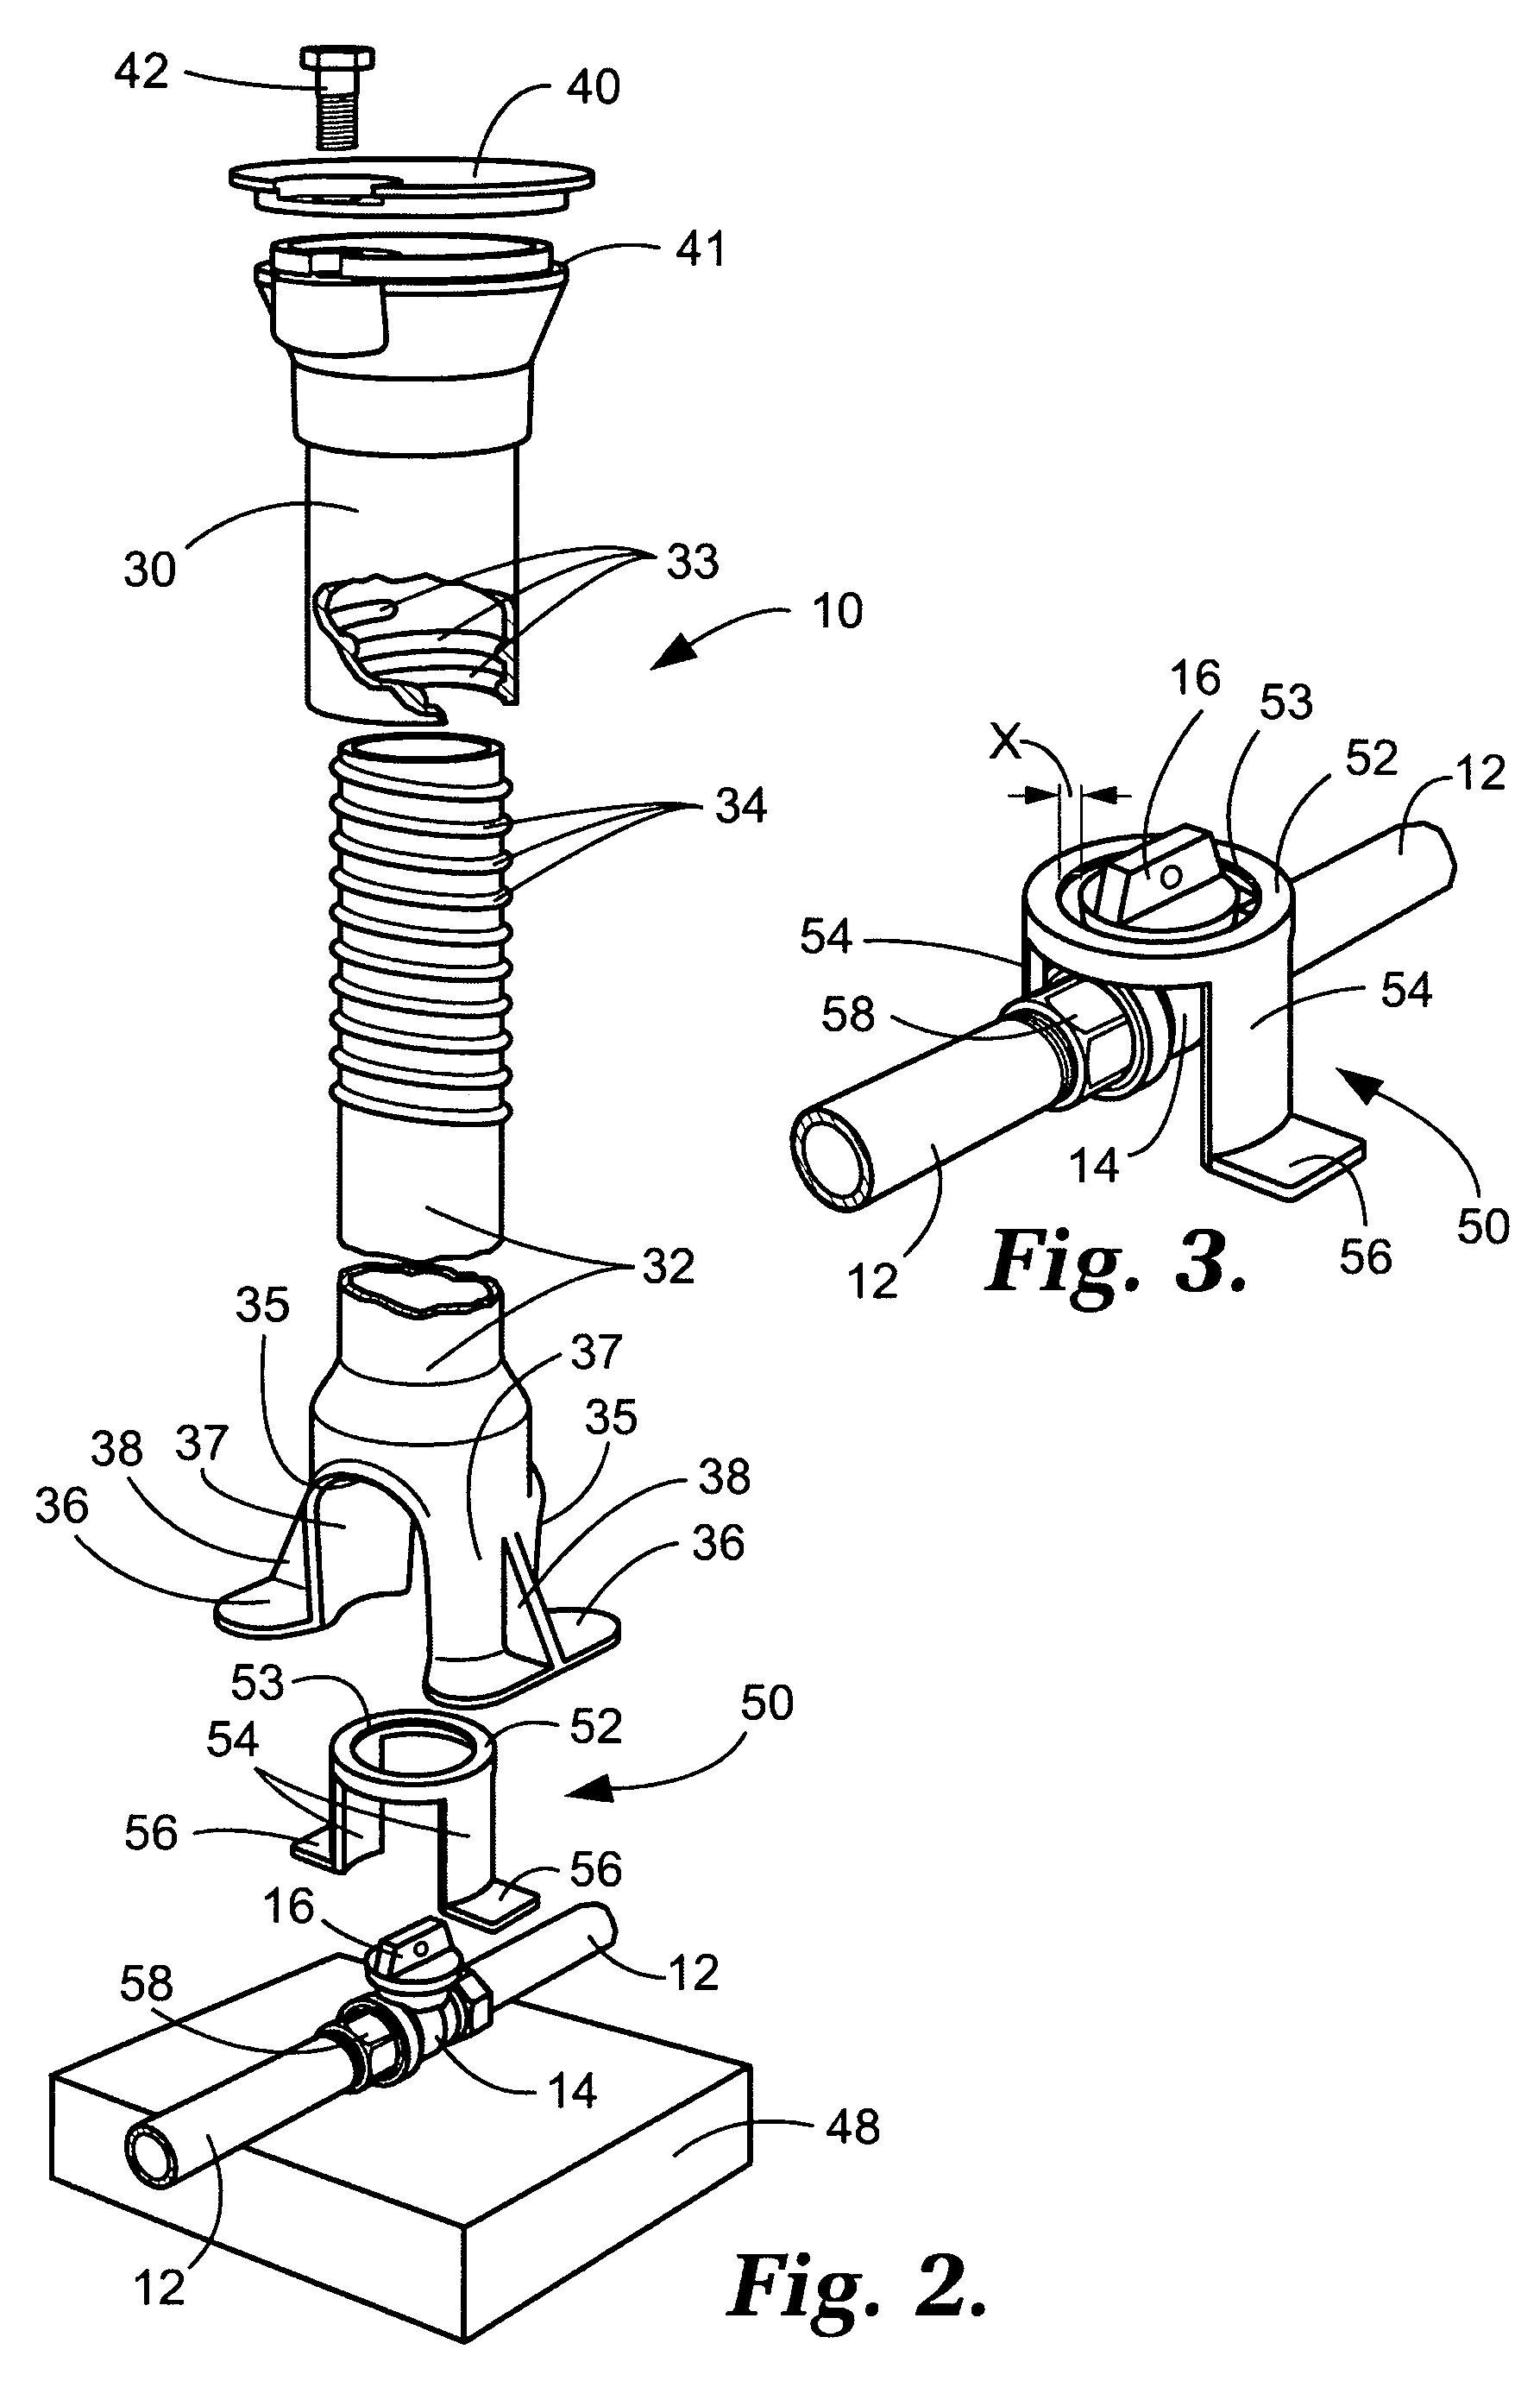 Valve key alignment assembly for curb stop box